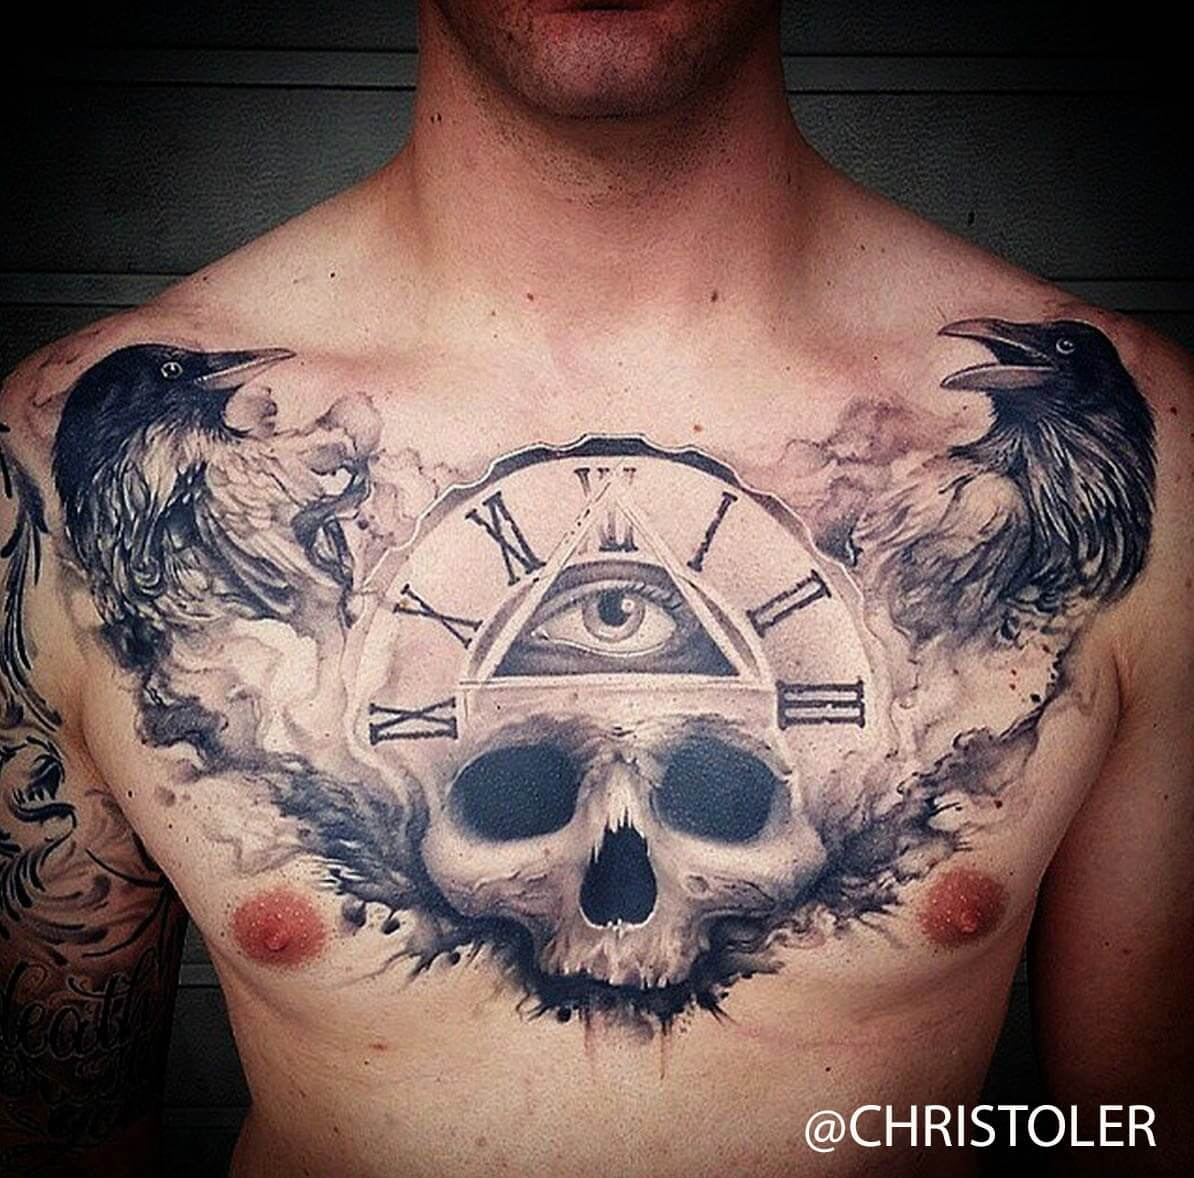 The 100 Best Chest Tattoos For Men Improb with sizing 1194 X 1178